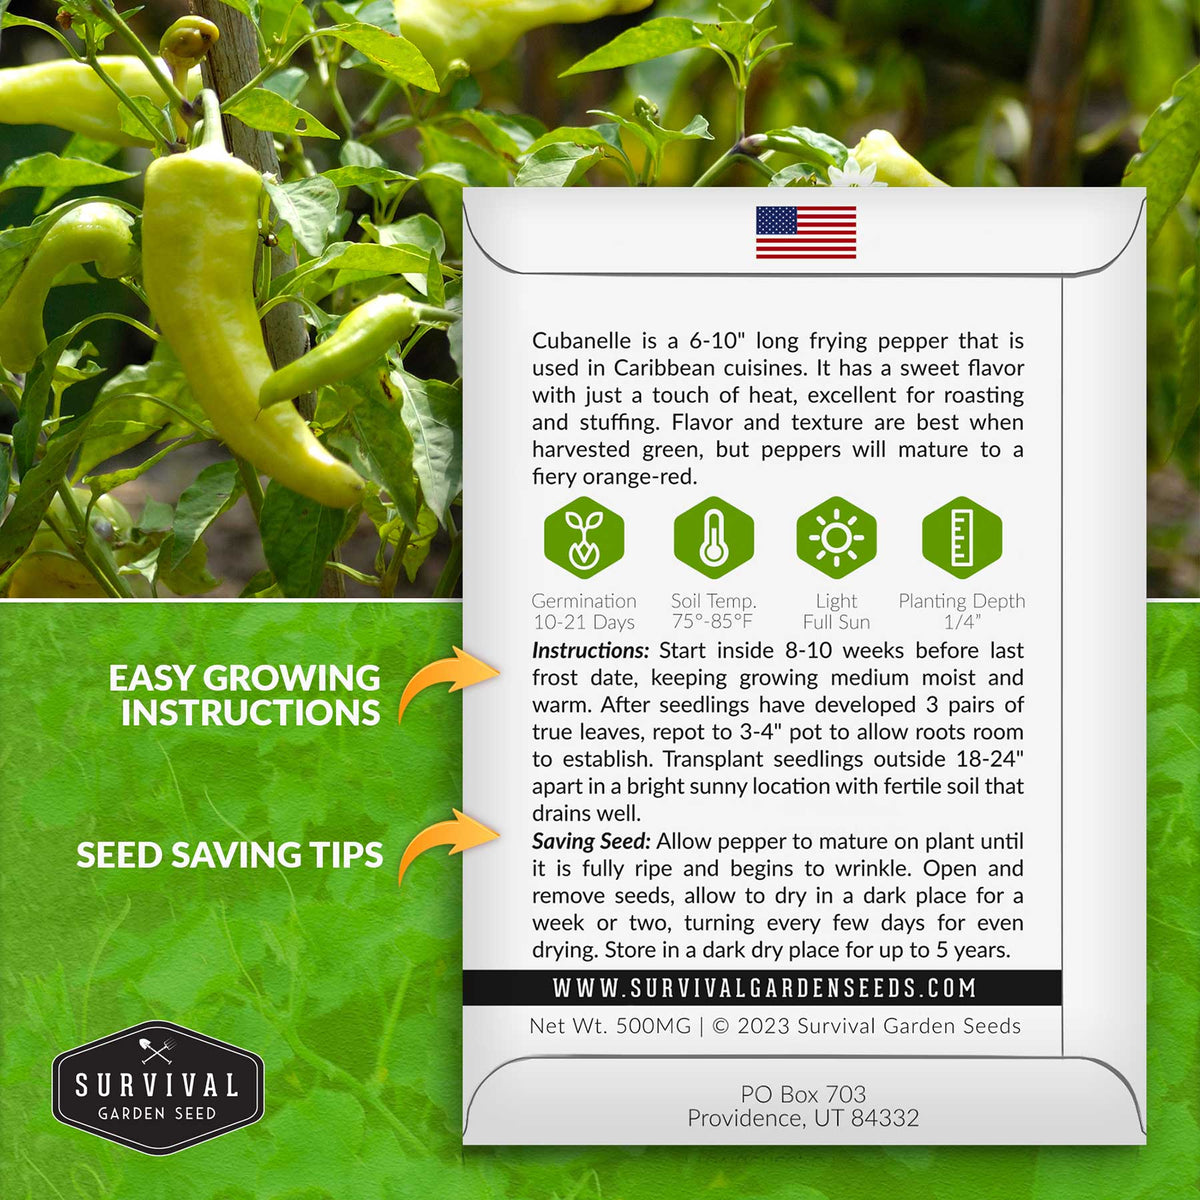 Cubanelle Pepper seed planting instructions